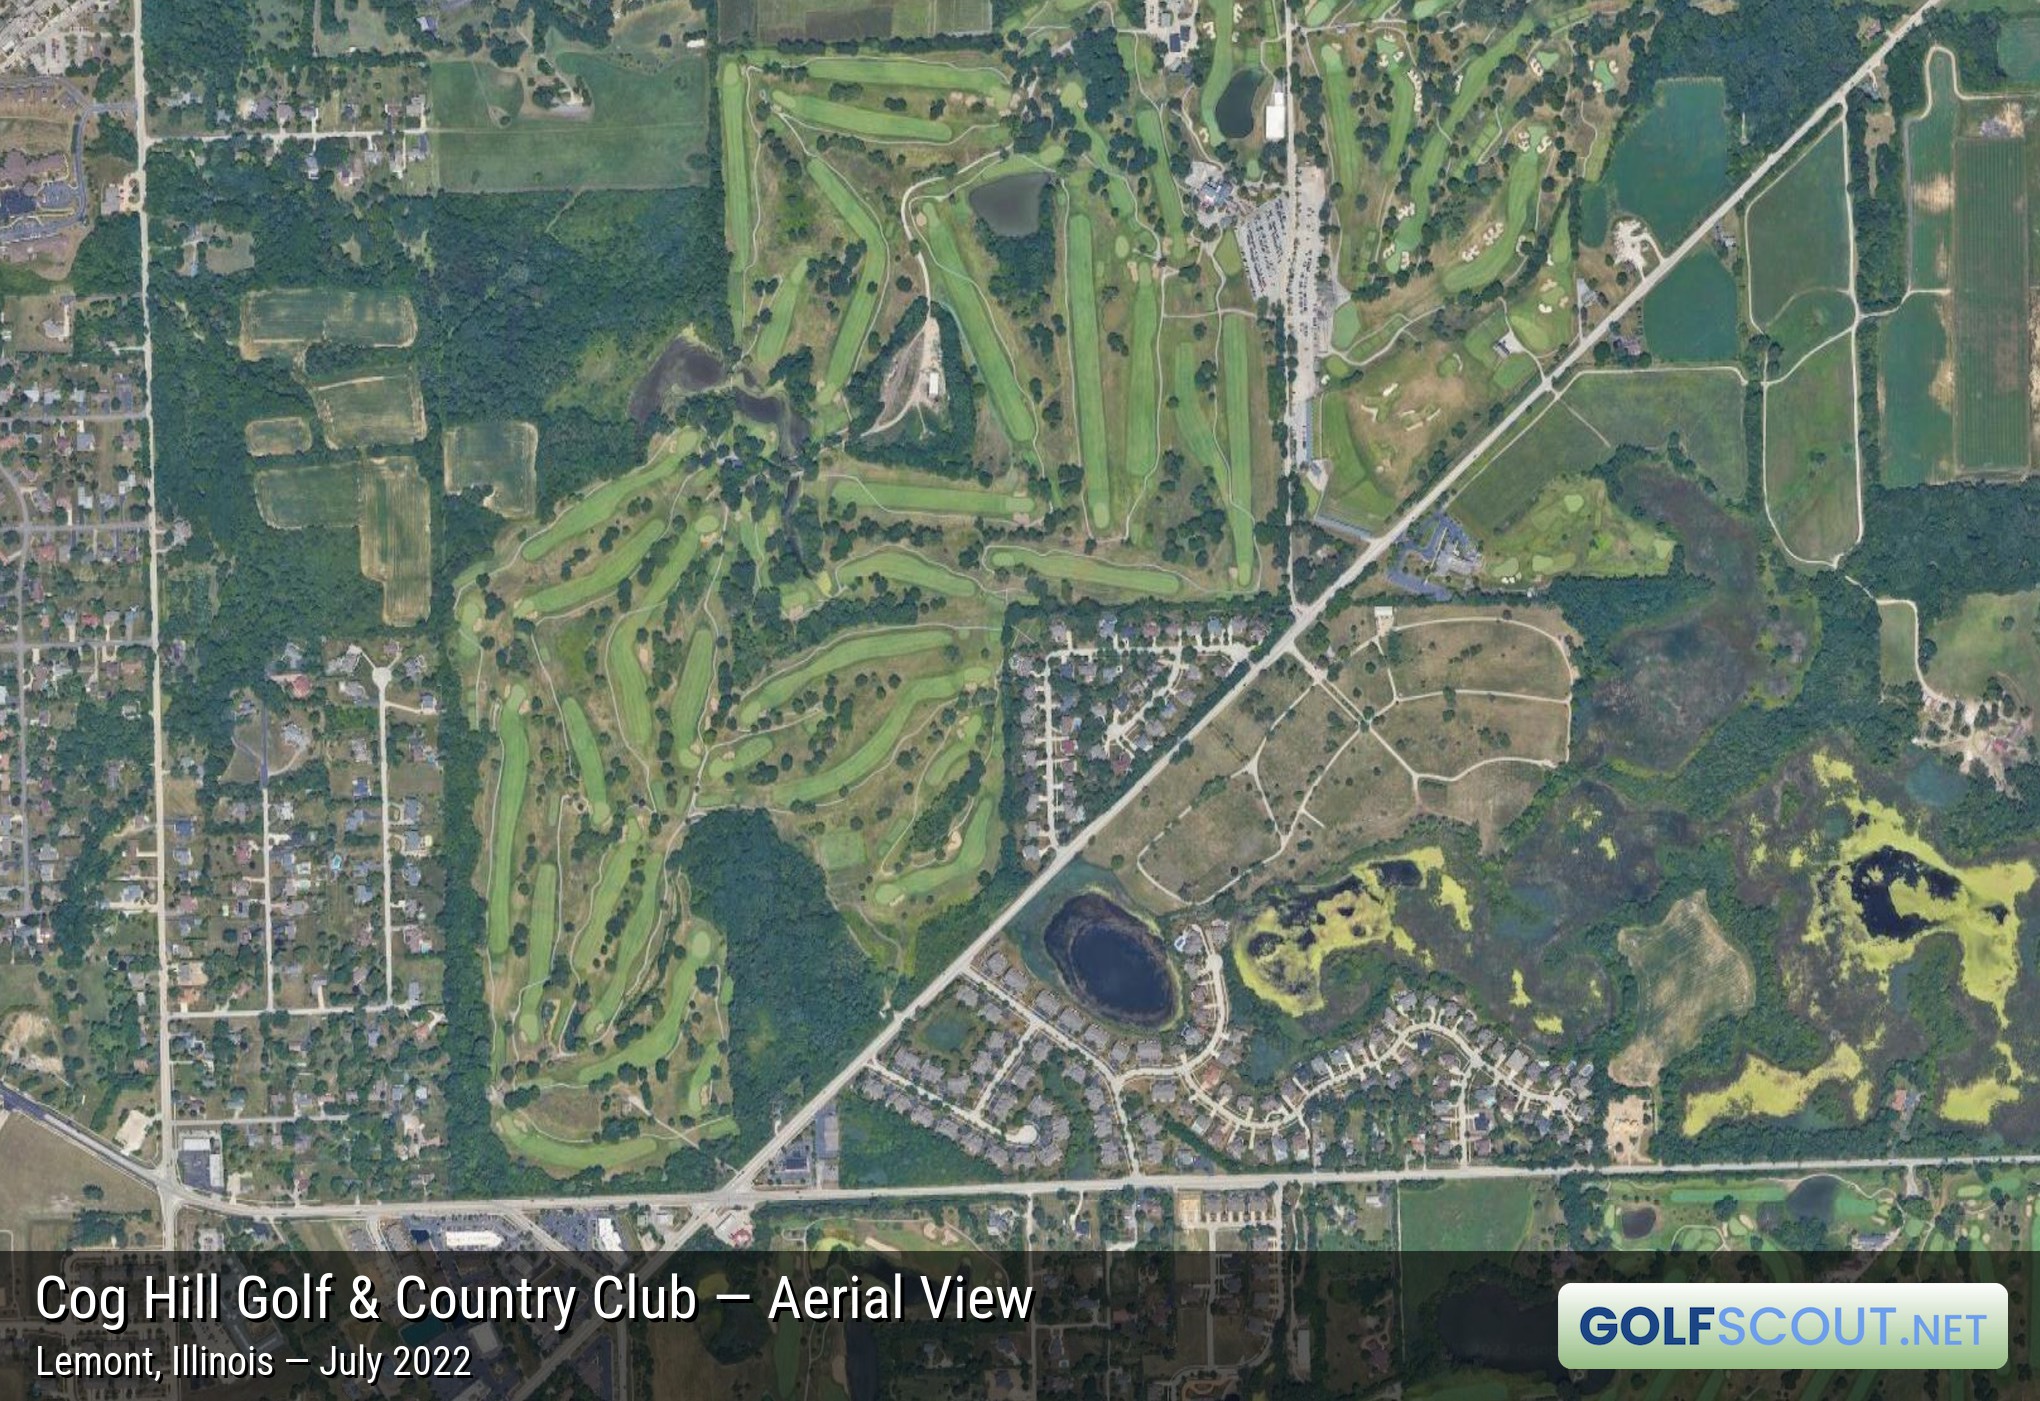 Aerial satellite imagery of Cog Hill Course #3 in Palos Park, Illinois. This image is zoomed in on the southwest area of Cog Hill where Courses 1 and 3 are located. Image courtesy of Google Maps.